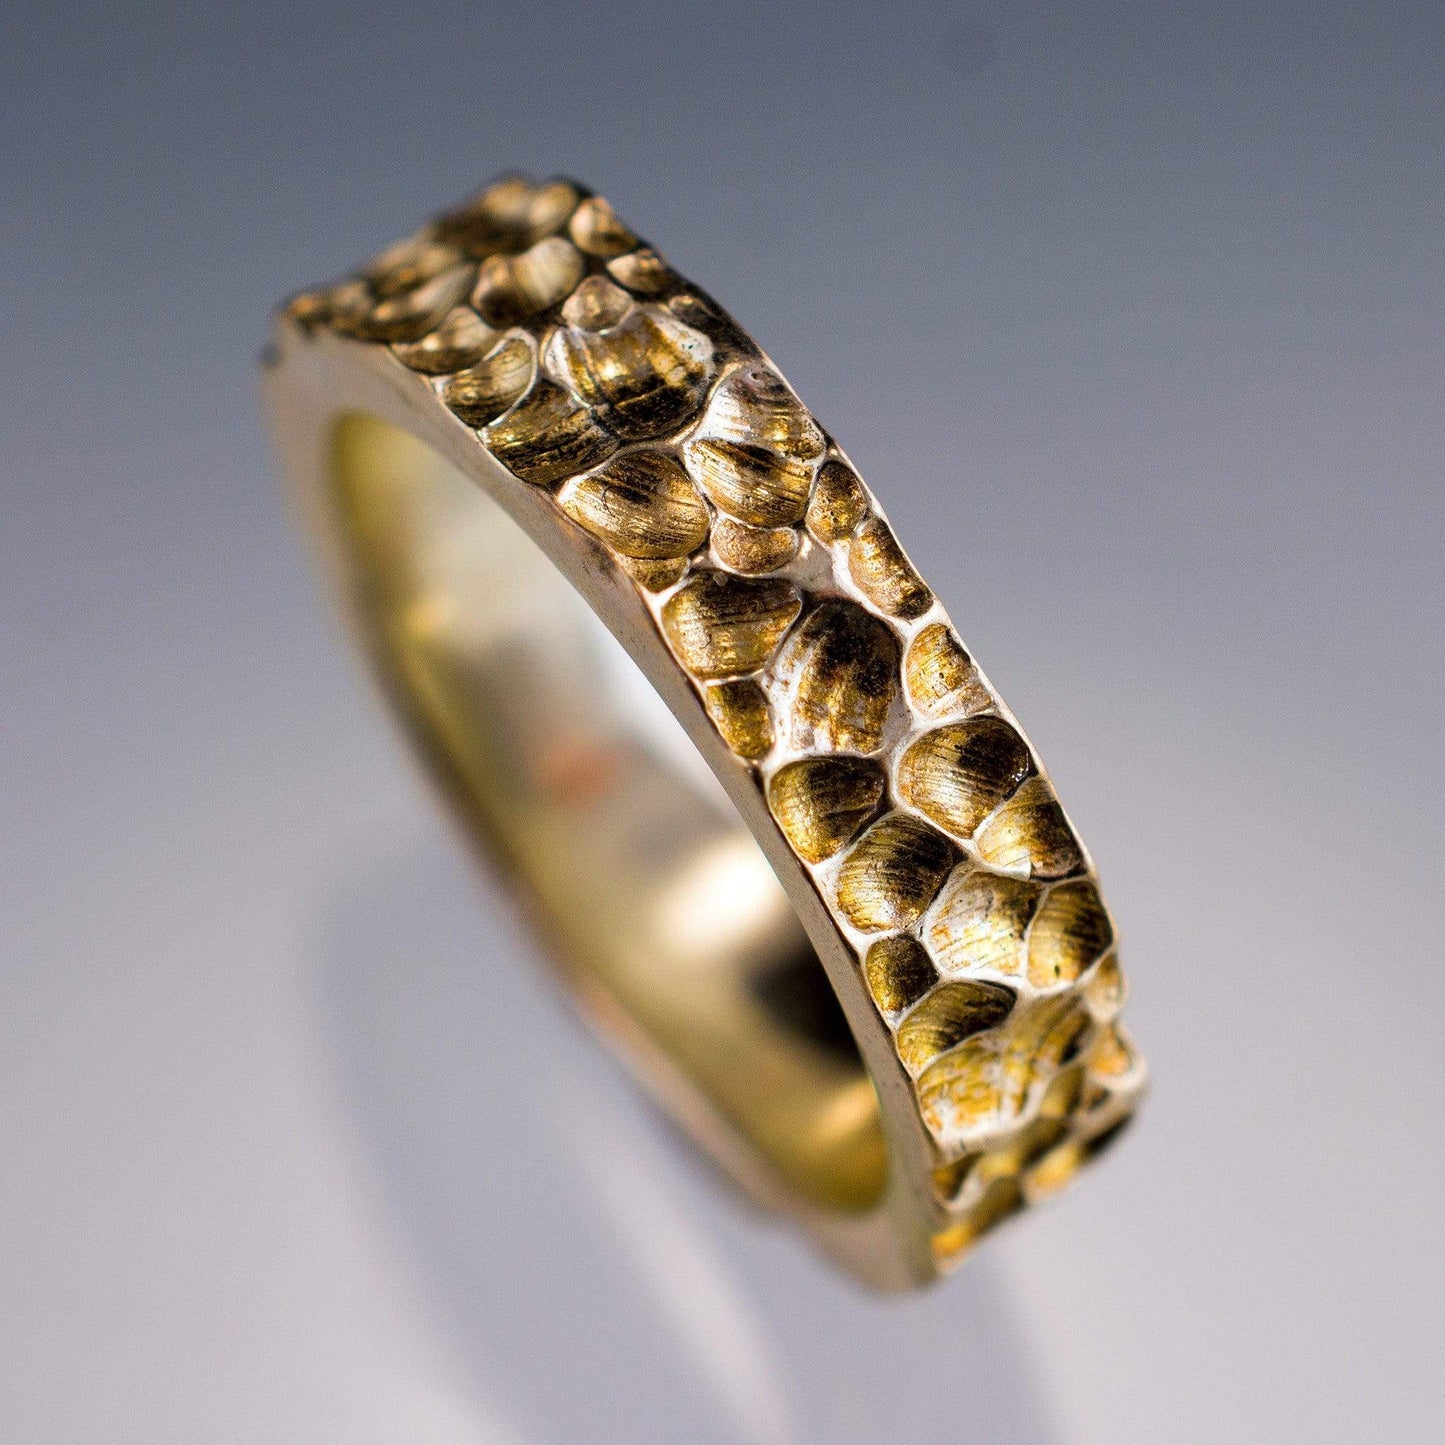 Crater Texture Wedding Ring Rustic Wedding Band 14k Yellow Gold / 3mm Ring by Nodeform